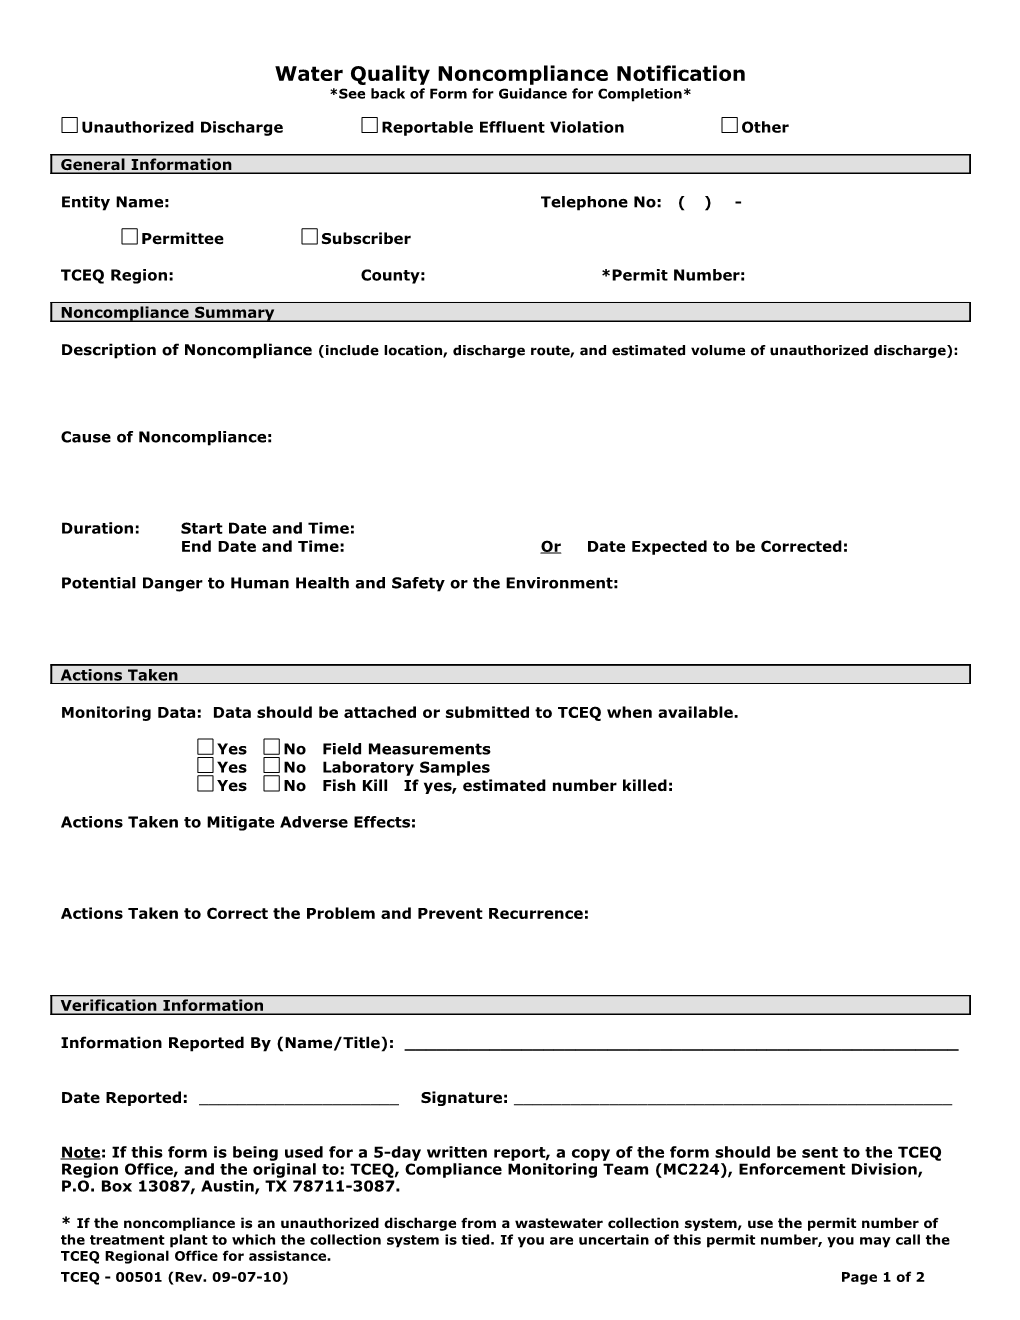 Guidance - Water Quality Noncompliance Notification Form